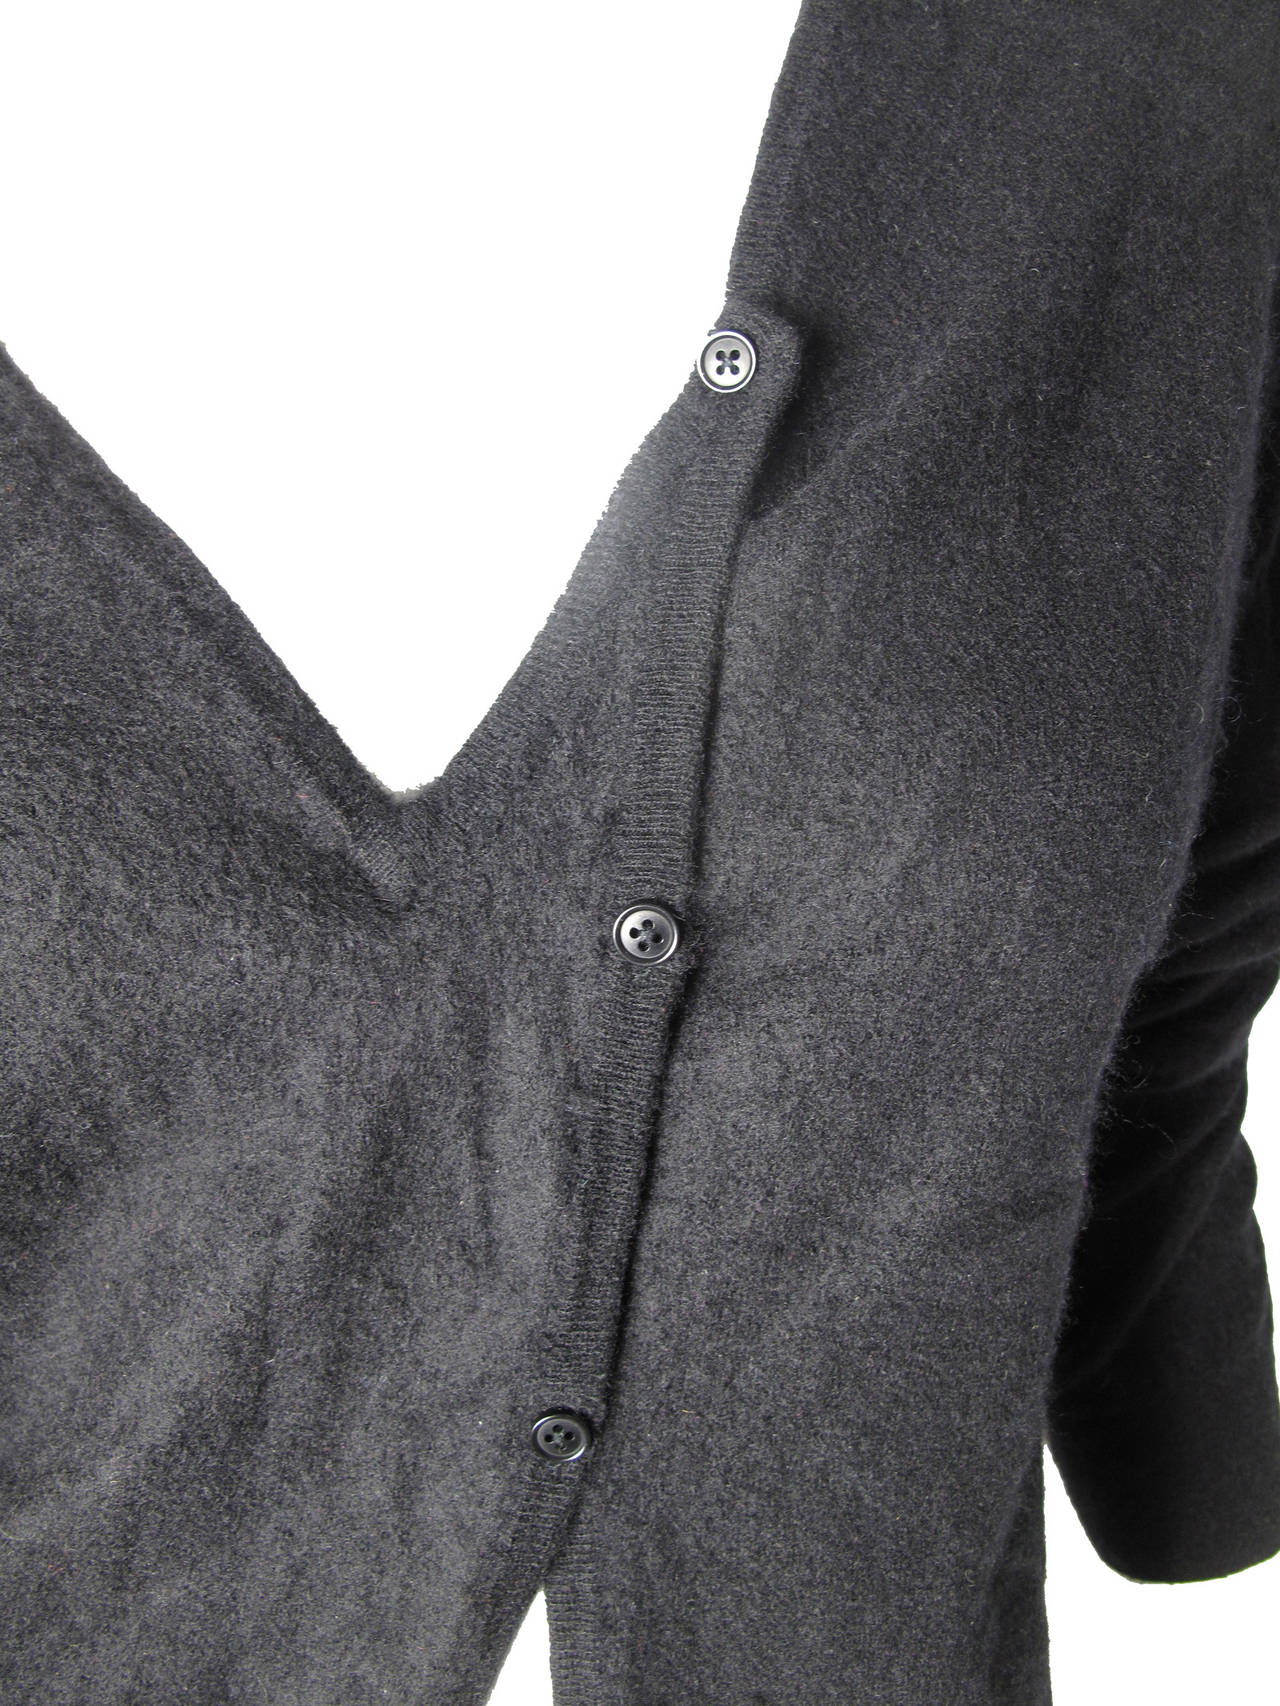 Helmut Lang black cashmere cardigan with buttons to create a pullover. Condition: Excellent. Size Large